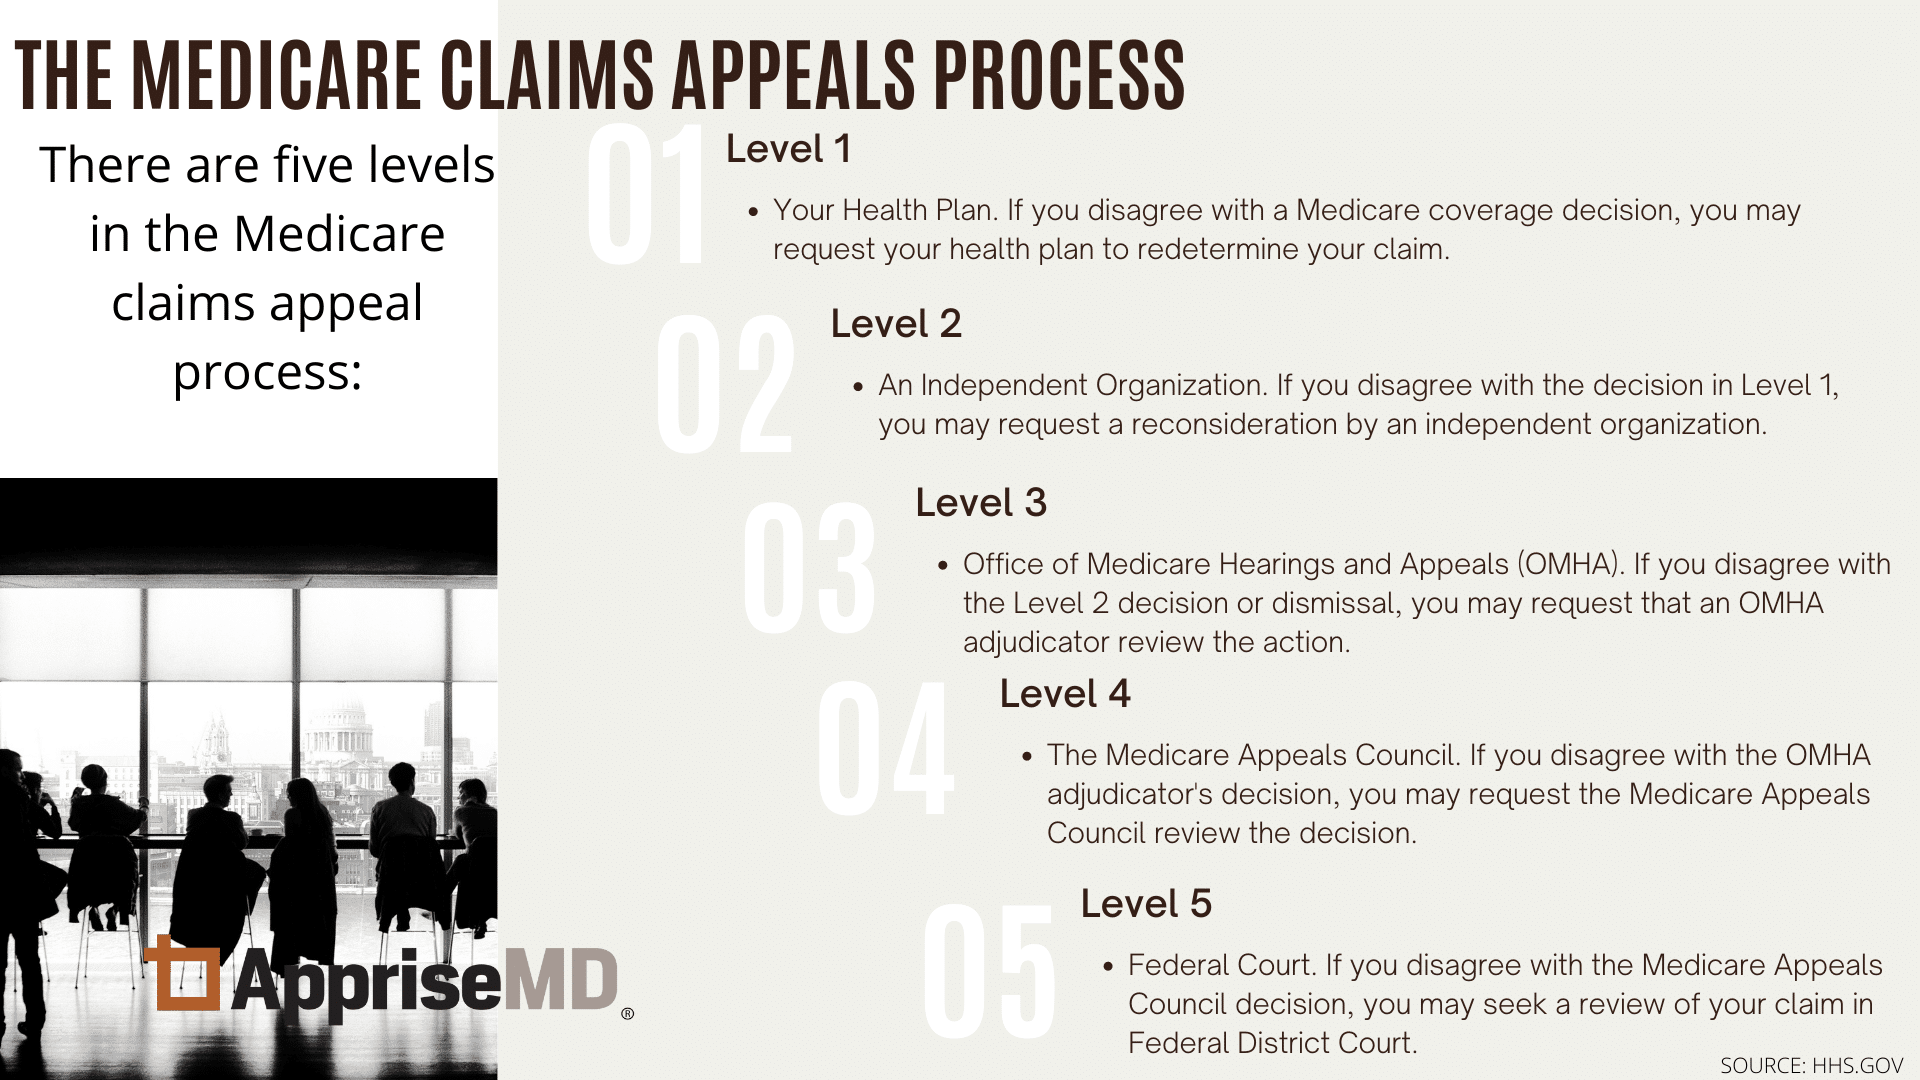 The Medicare Claims Appeals Process graphic